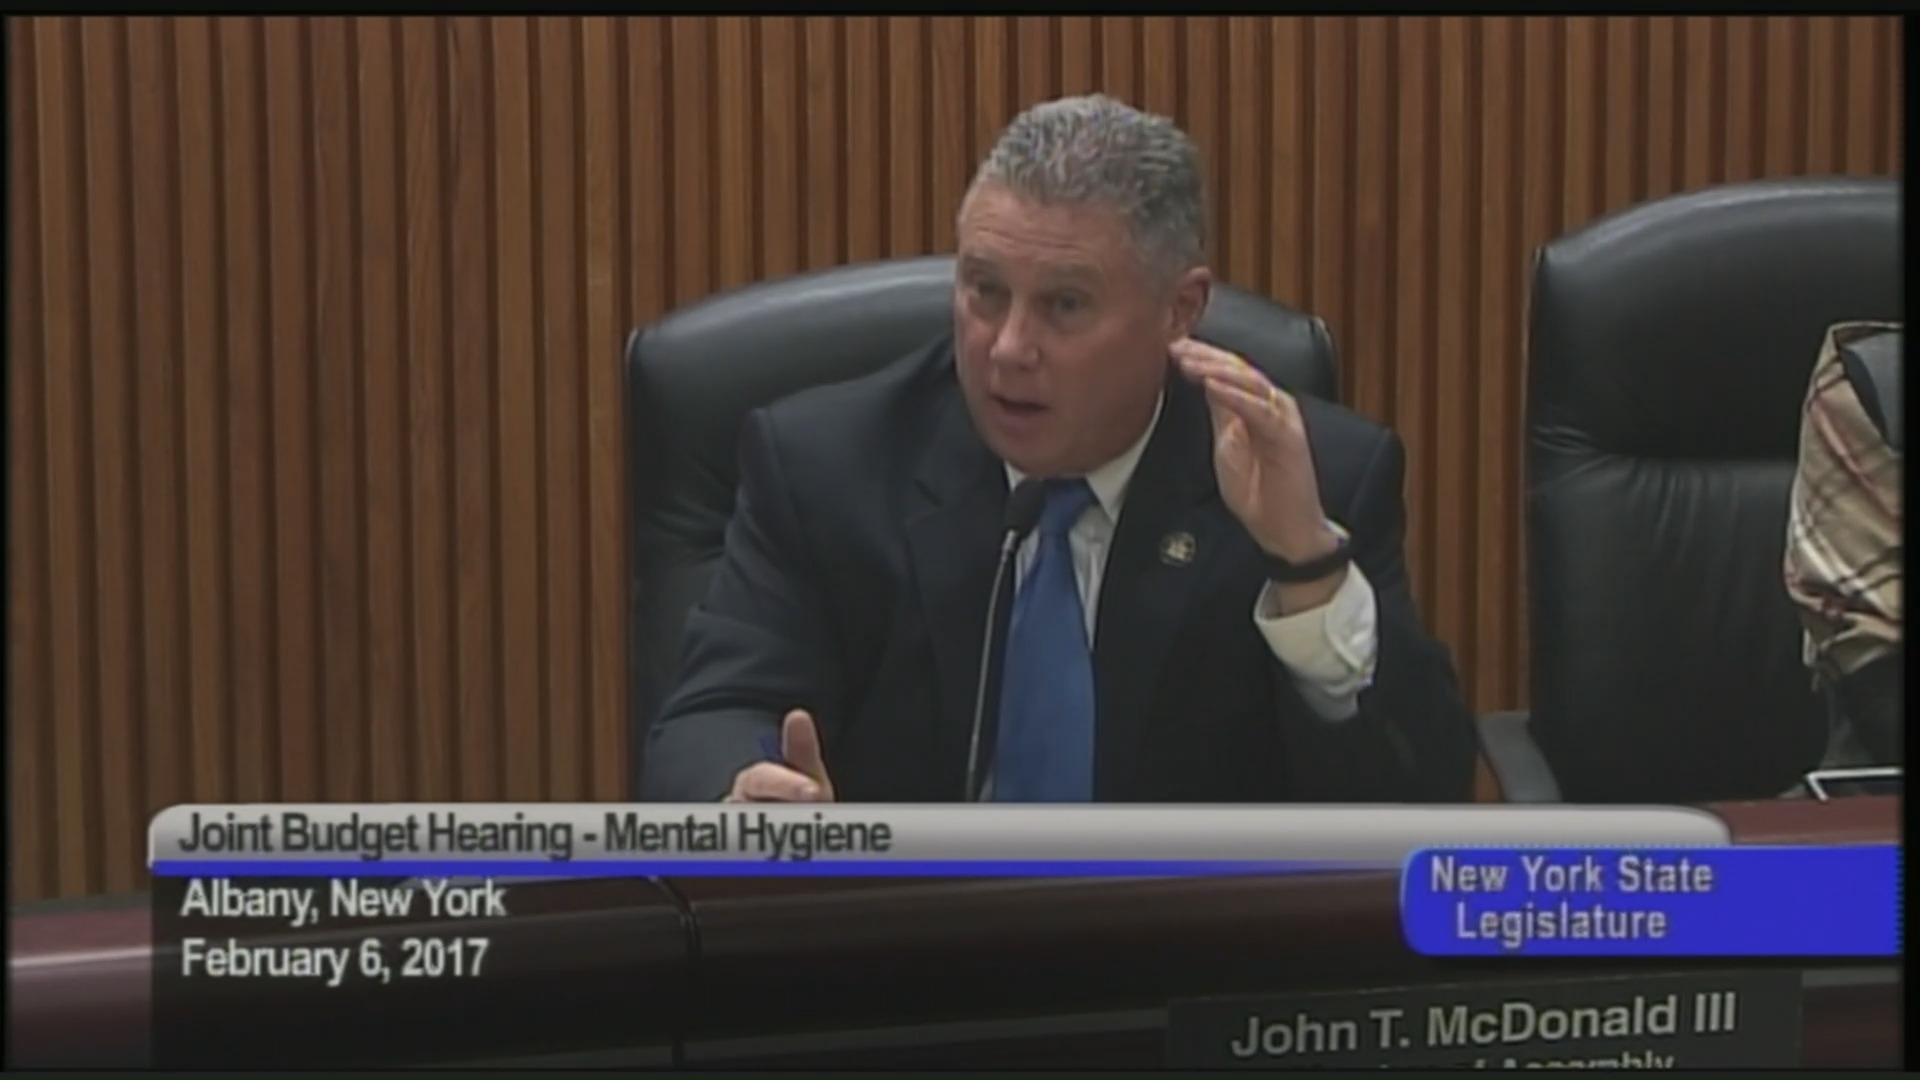 Joint Senate and Assembly Budget Hearing on Mental Hygiene